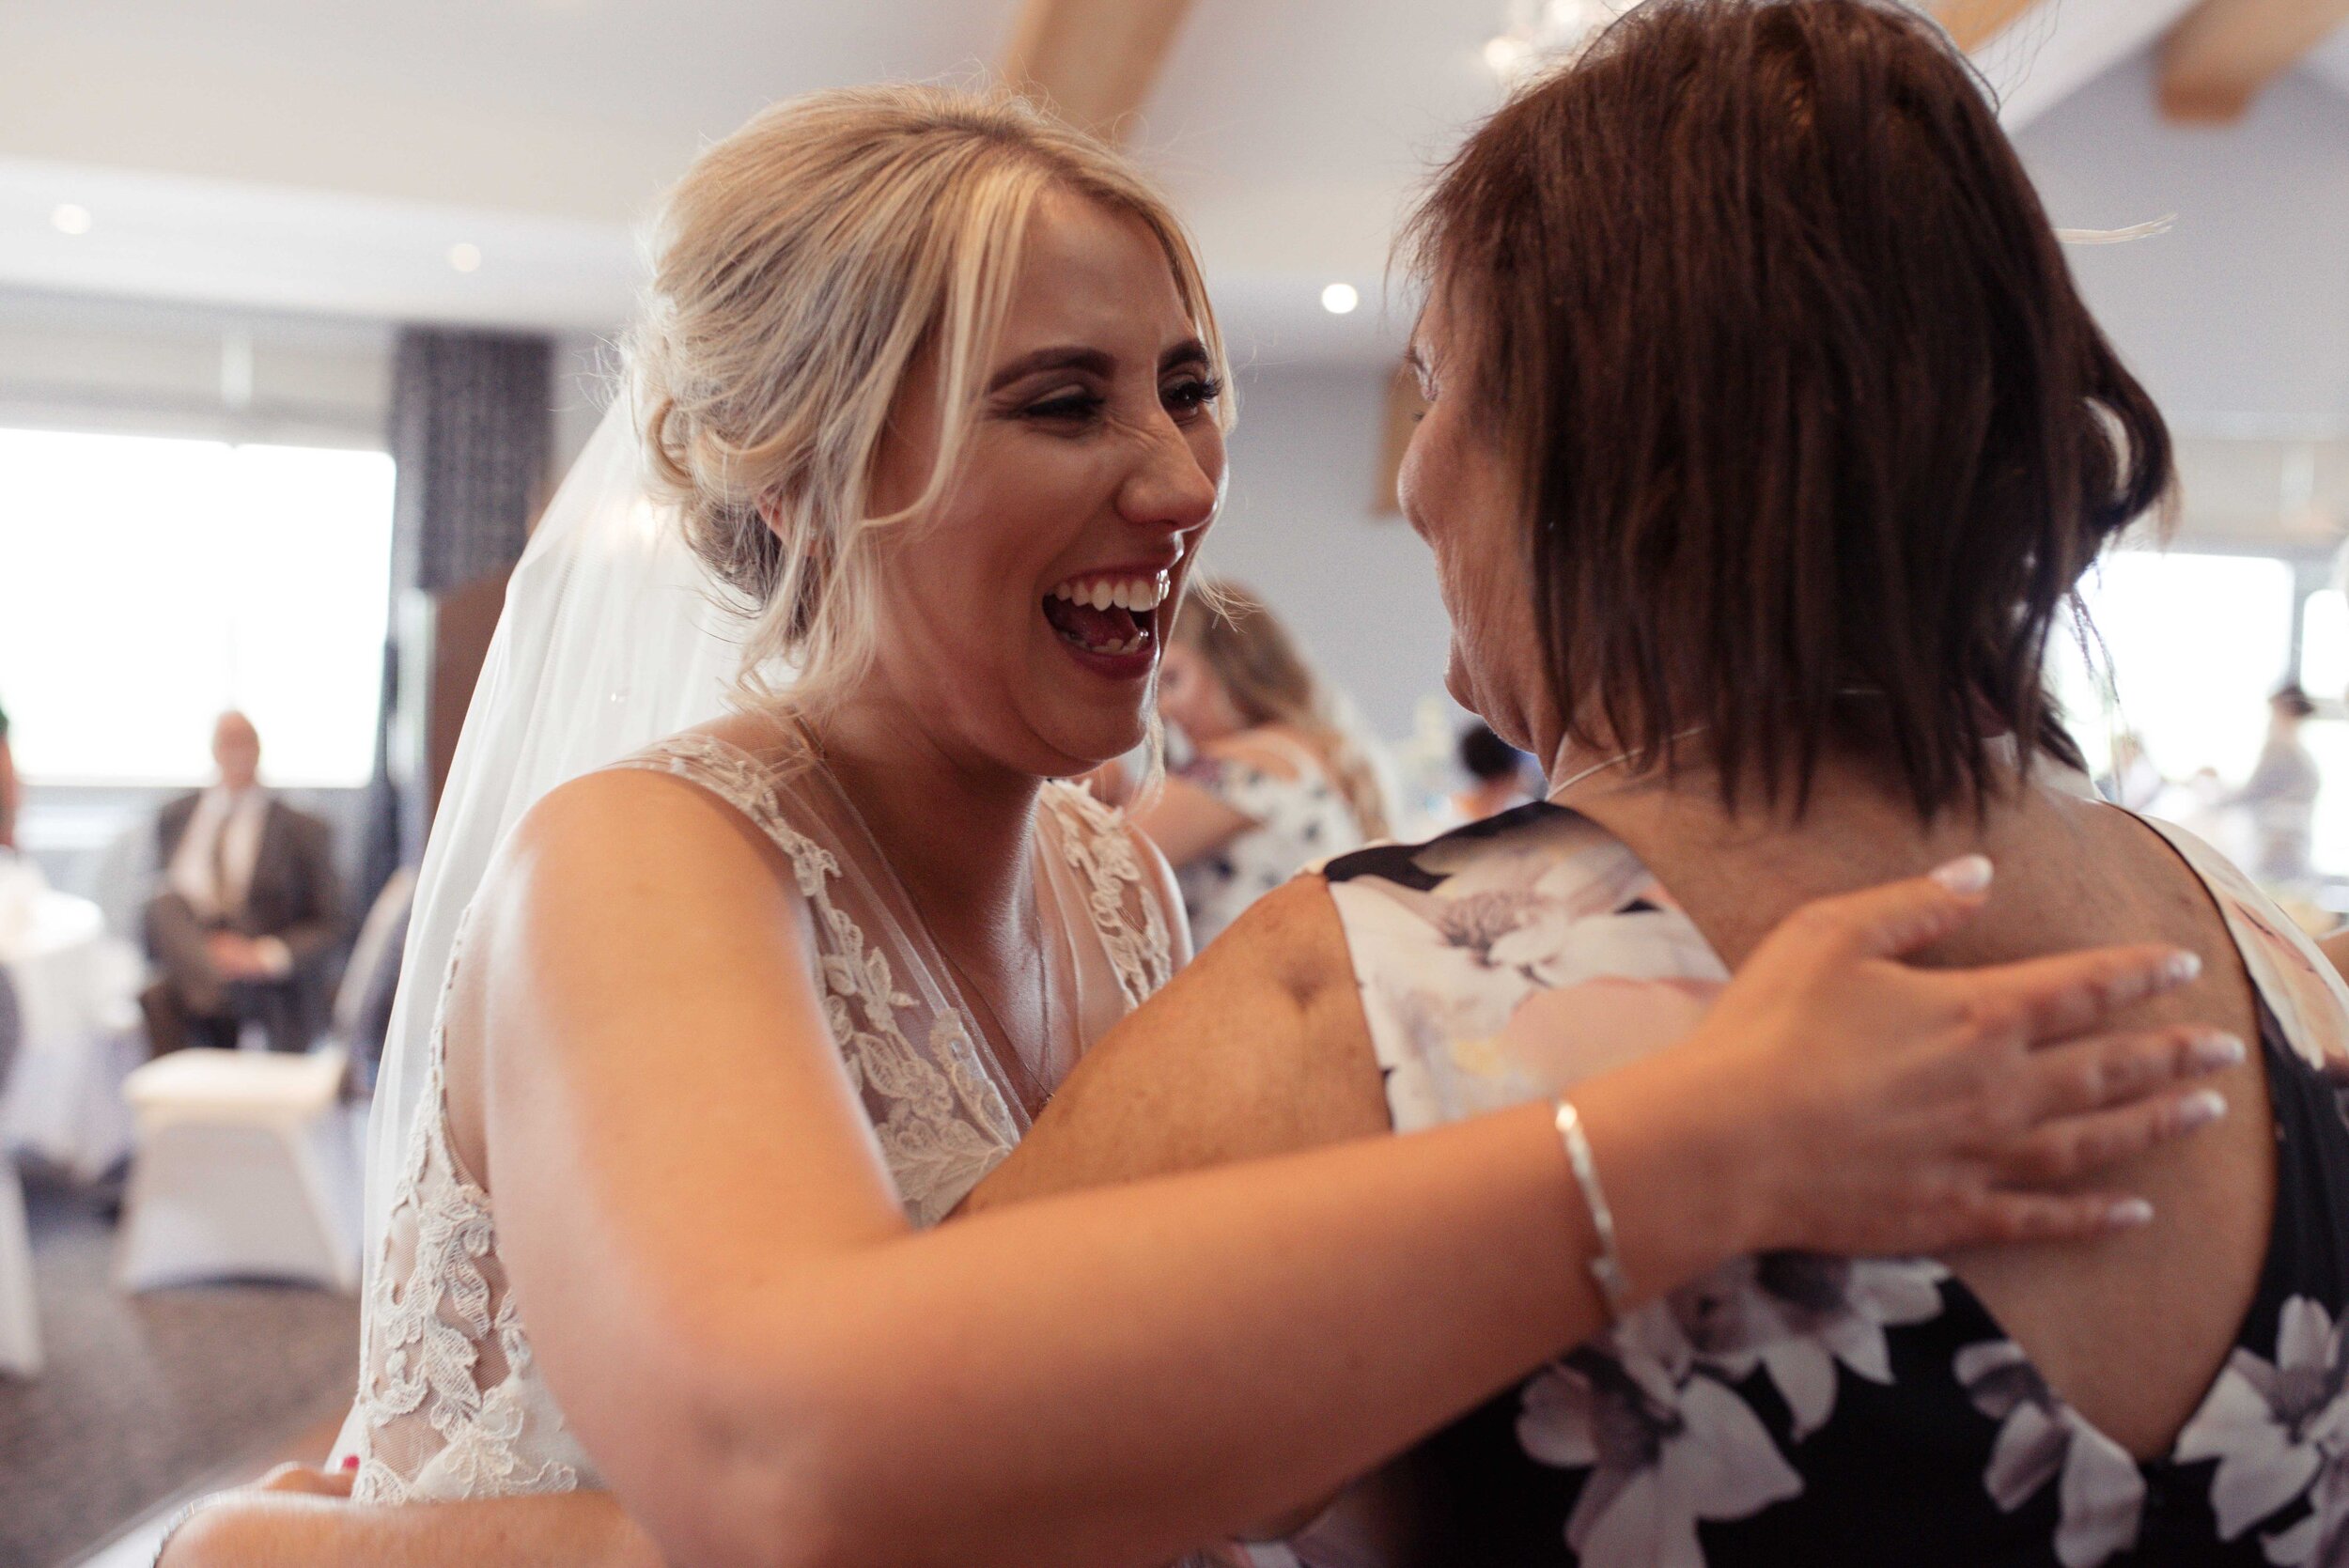 The bride greats a wedding guest with a big smile on her face